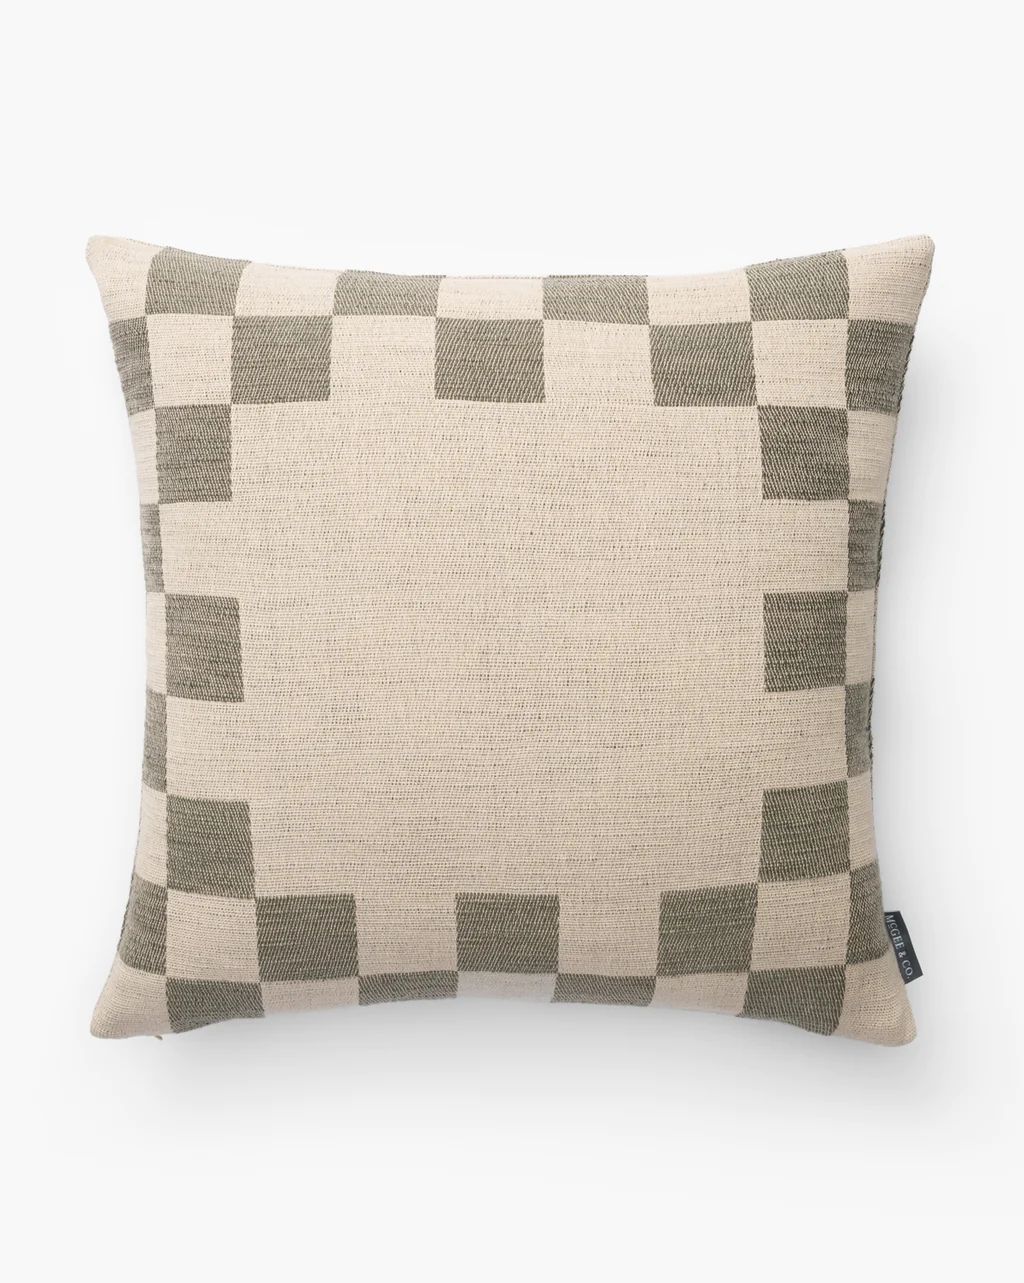 Marni Pillow Cover | McGee & Co.